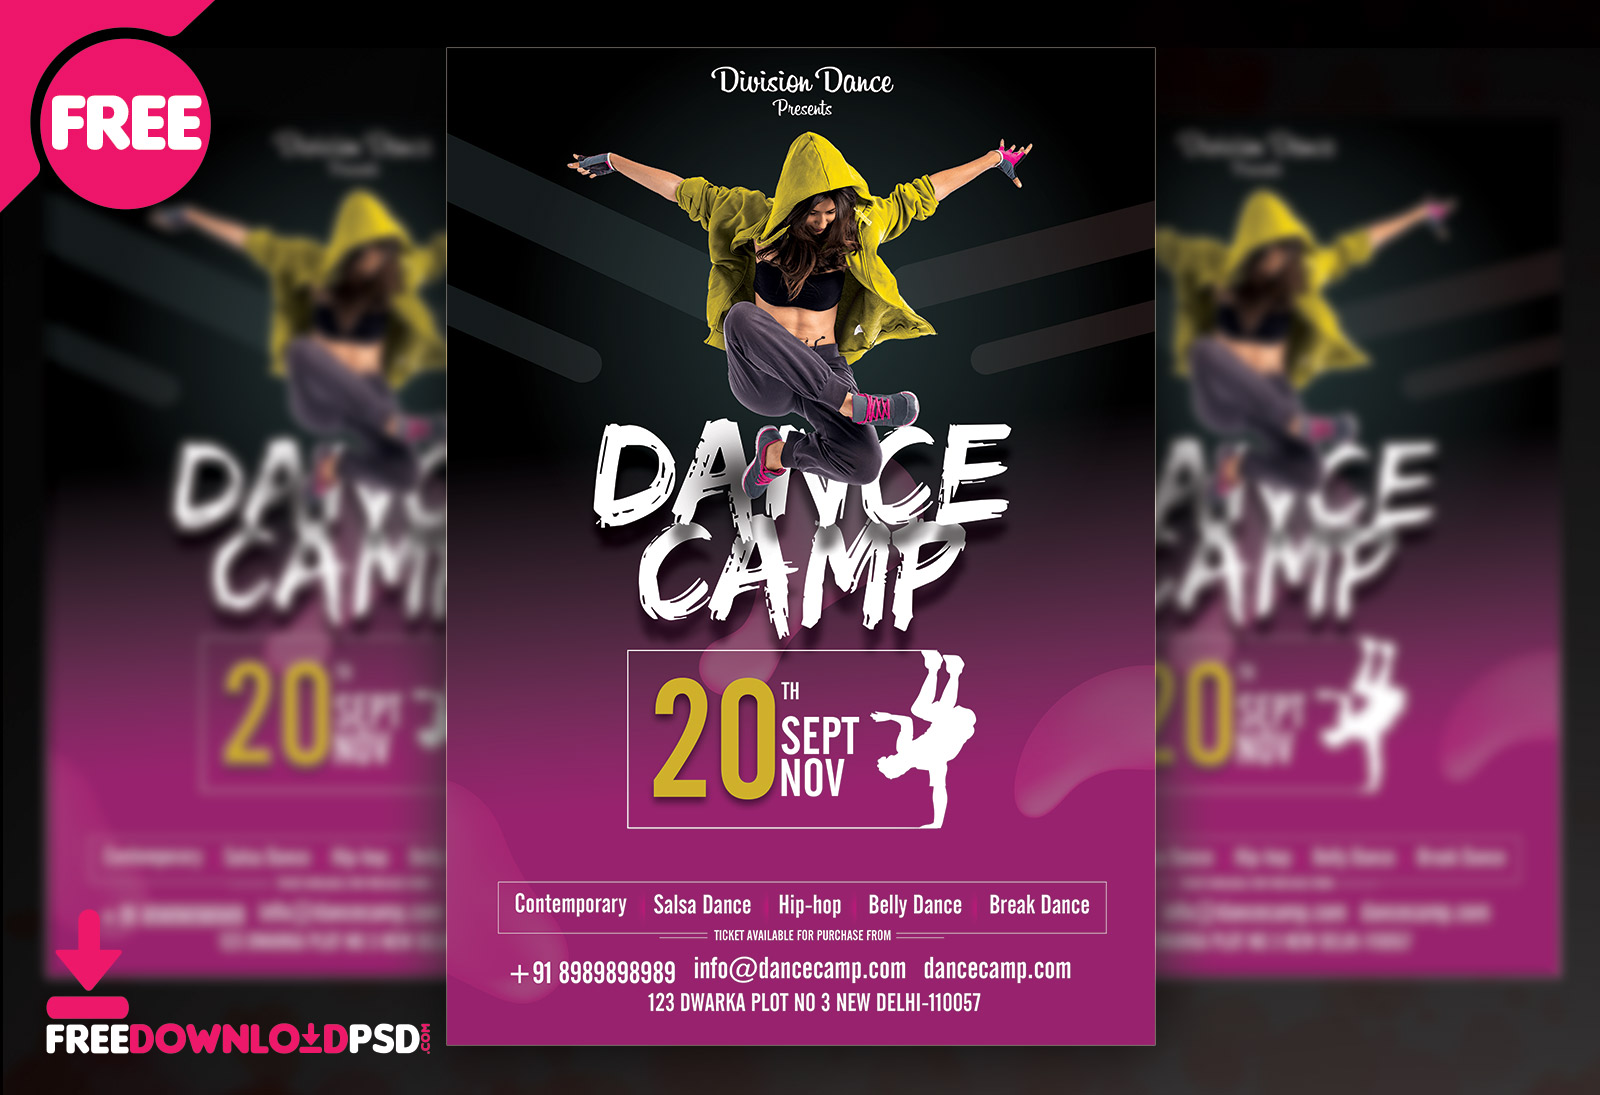 Dance Camp Flyer Free Psd  FreedownloadPSD.com Intended For Dance Flyer Template Word